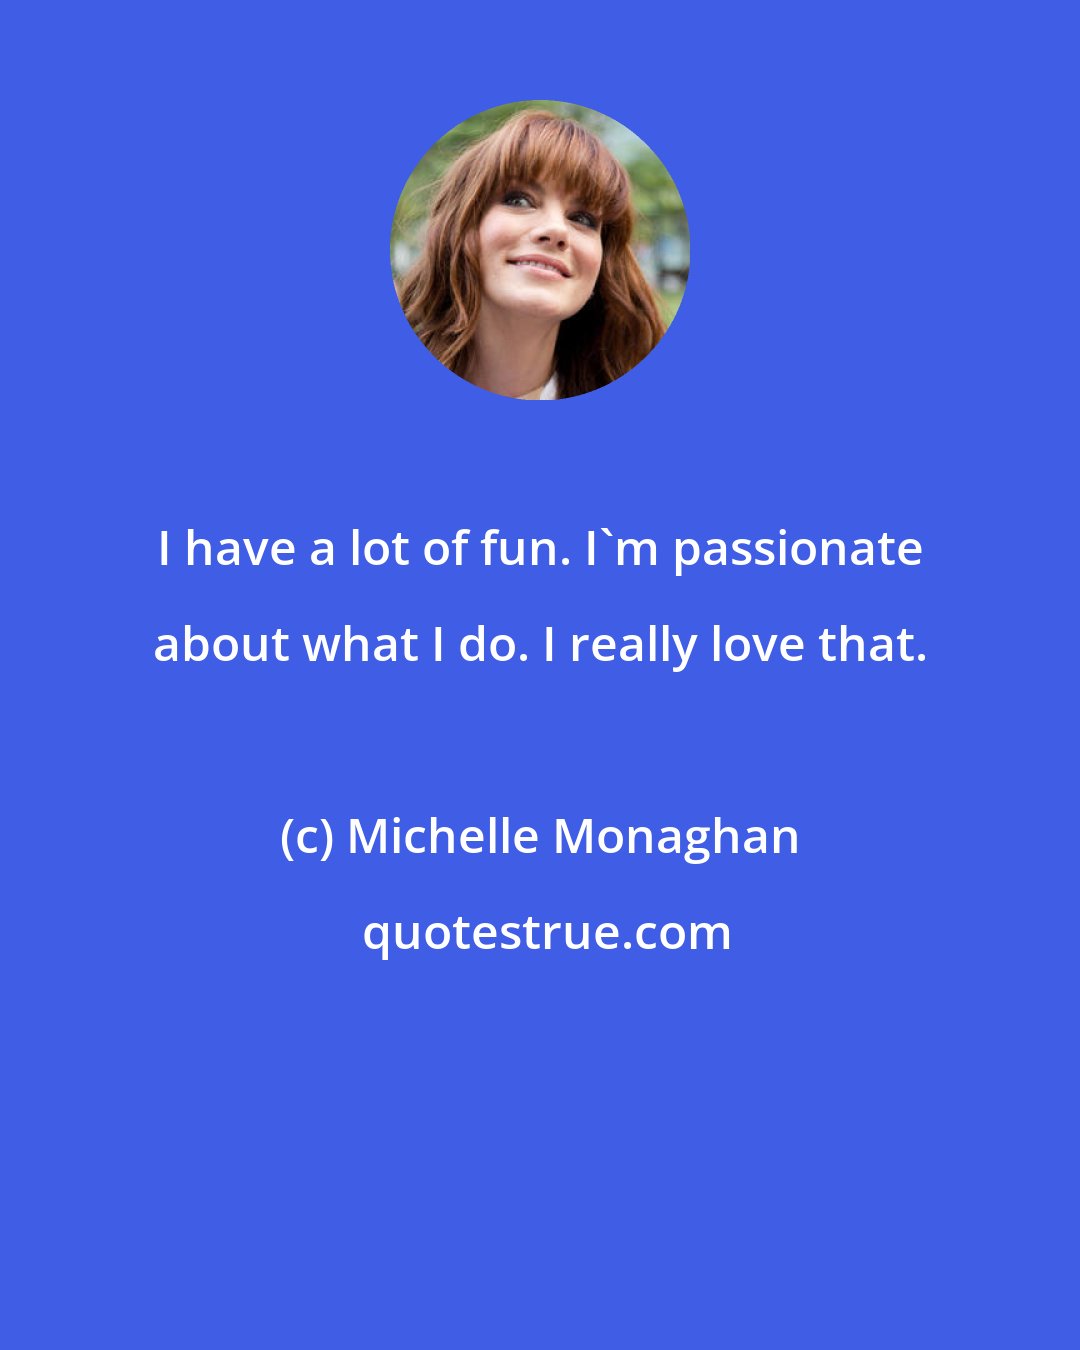 Michelle Monaghan: I have a lot of fun. I'm passionate about what I do. I really love that.